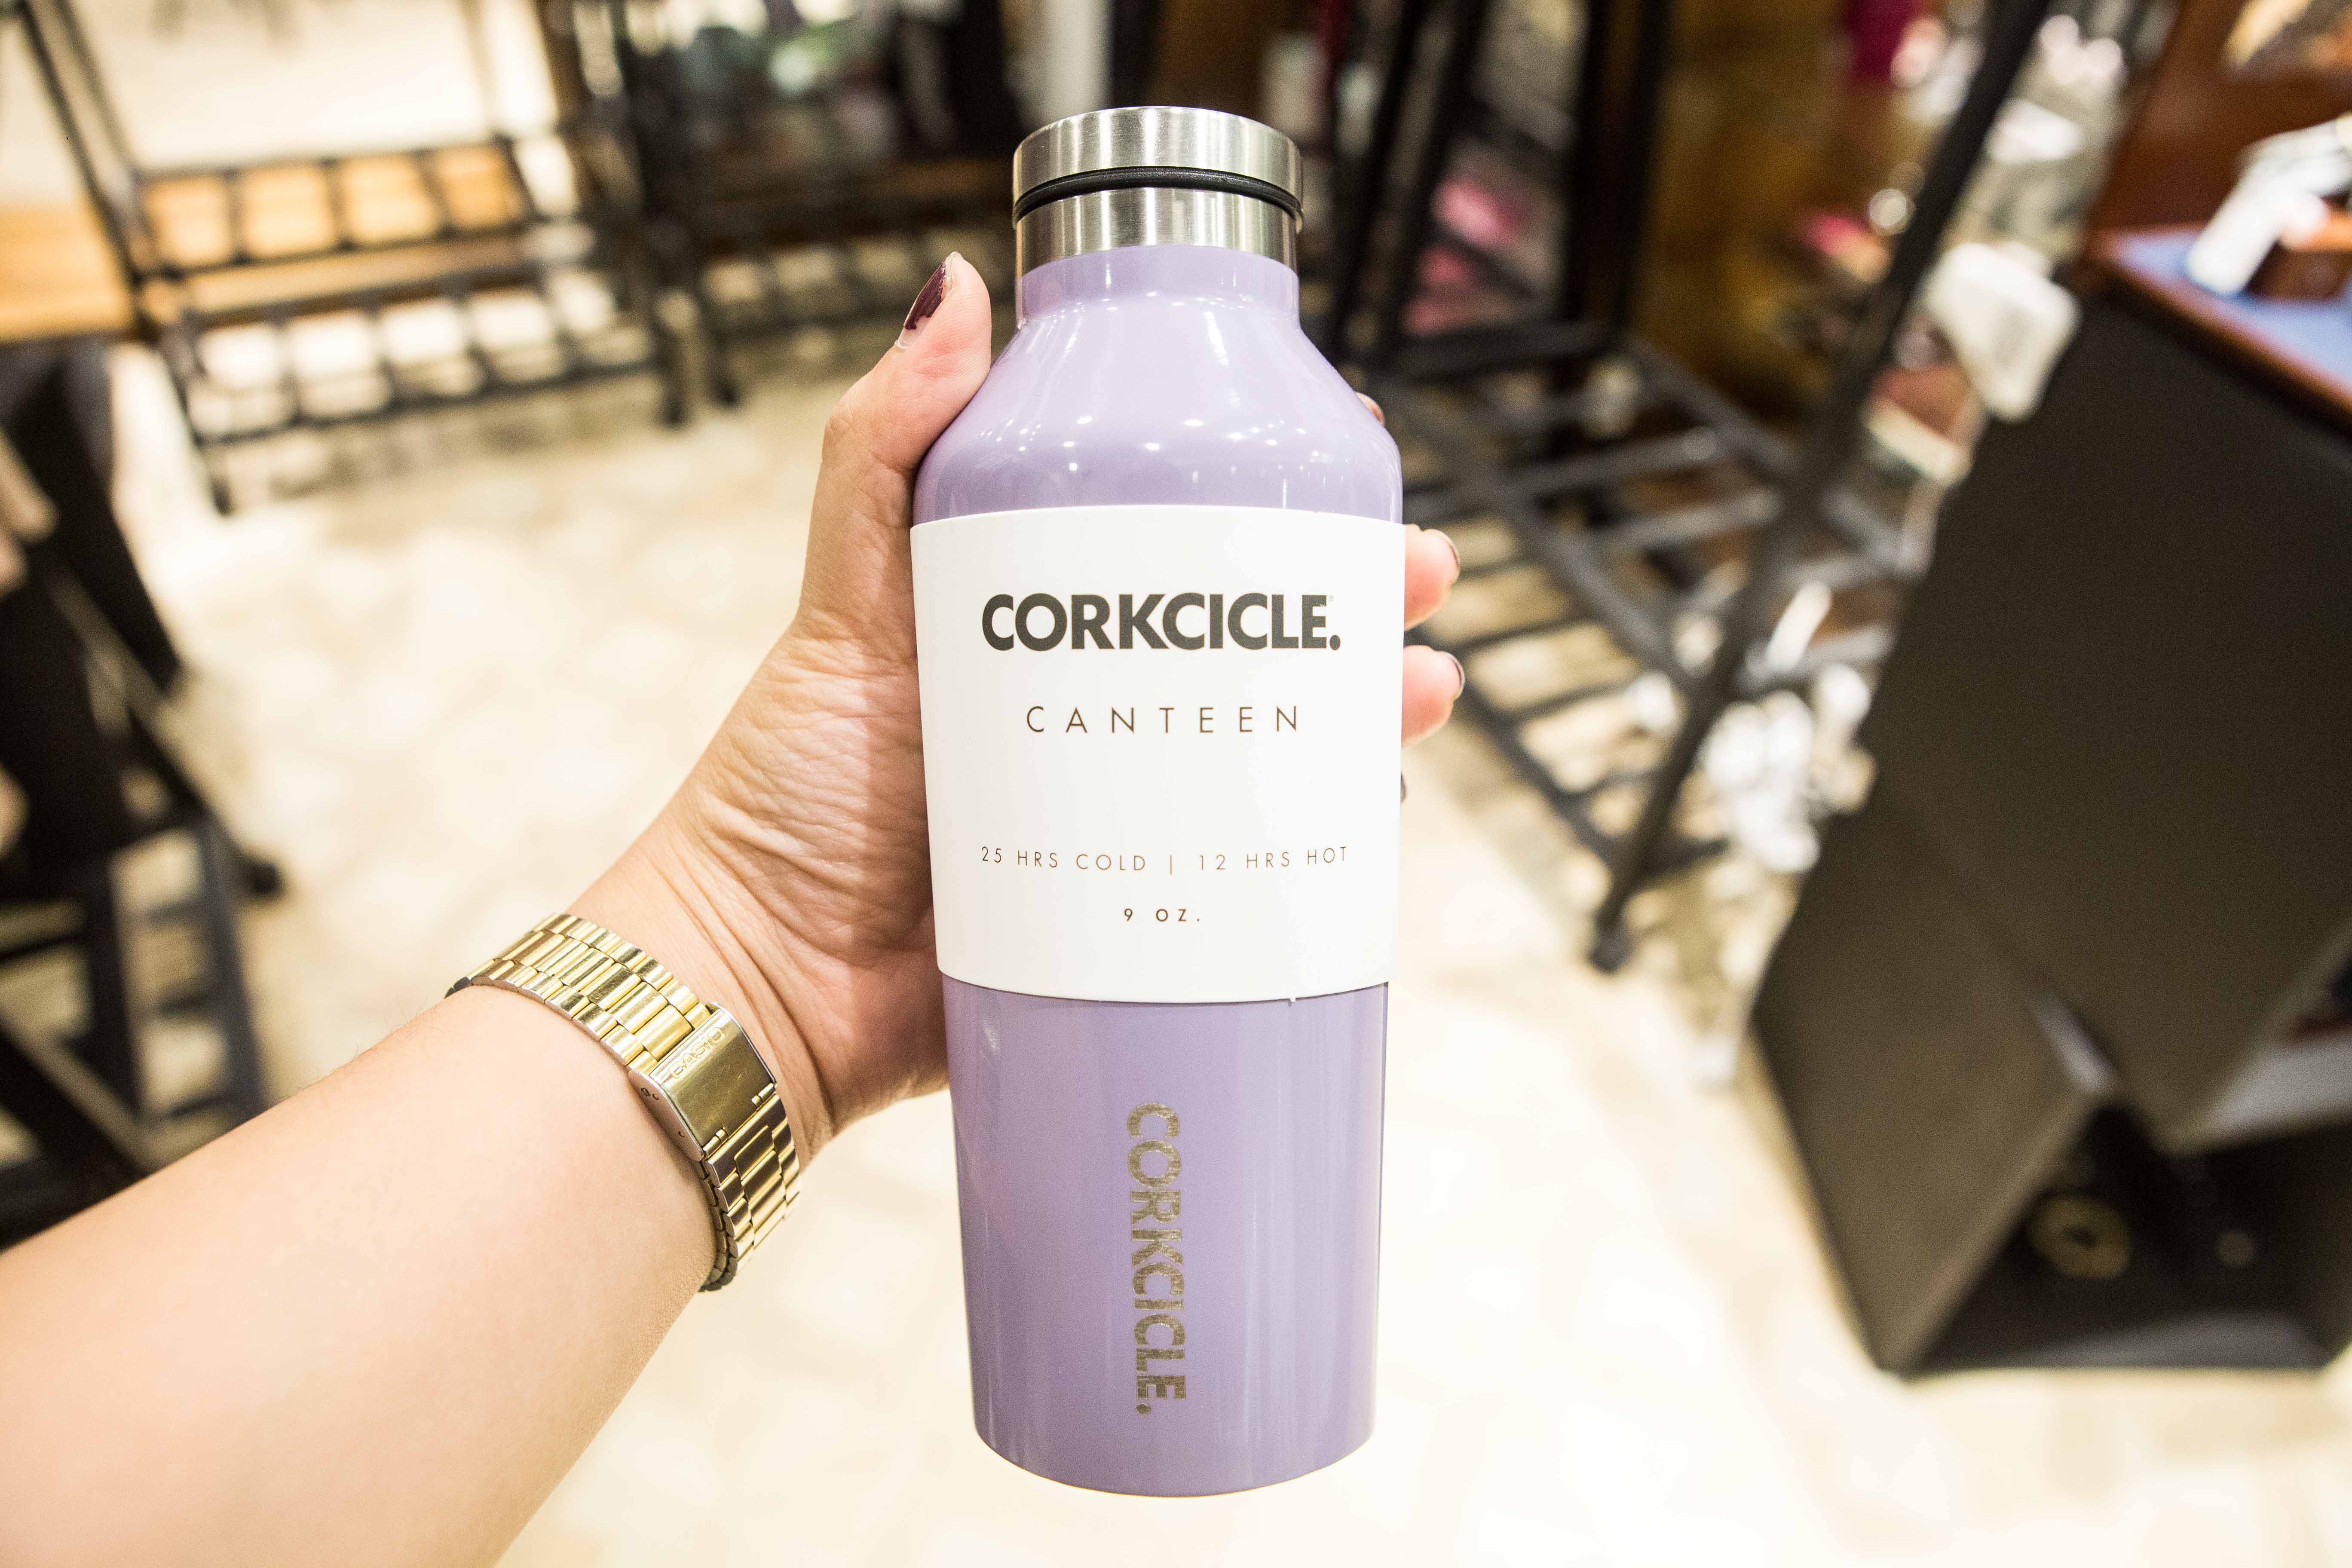 Keep your drinks cool for as long as 25 hours, or warm for 12 hours. Corkcicles canteens come in 9oz, 16oz, 25oz, and 60oz sizes and a variety of colors.